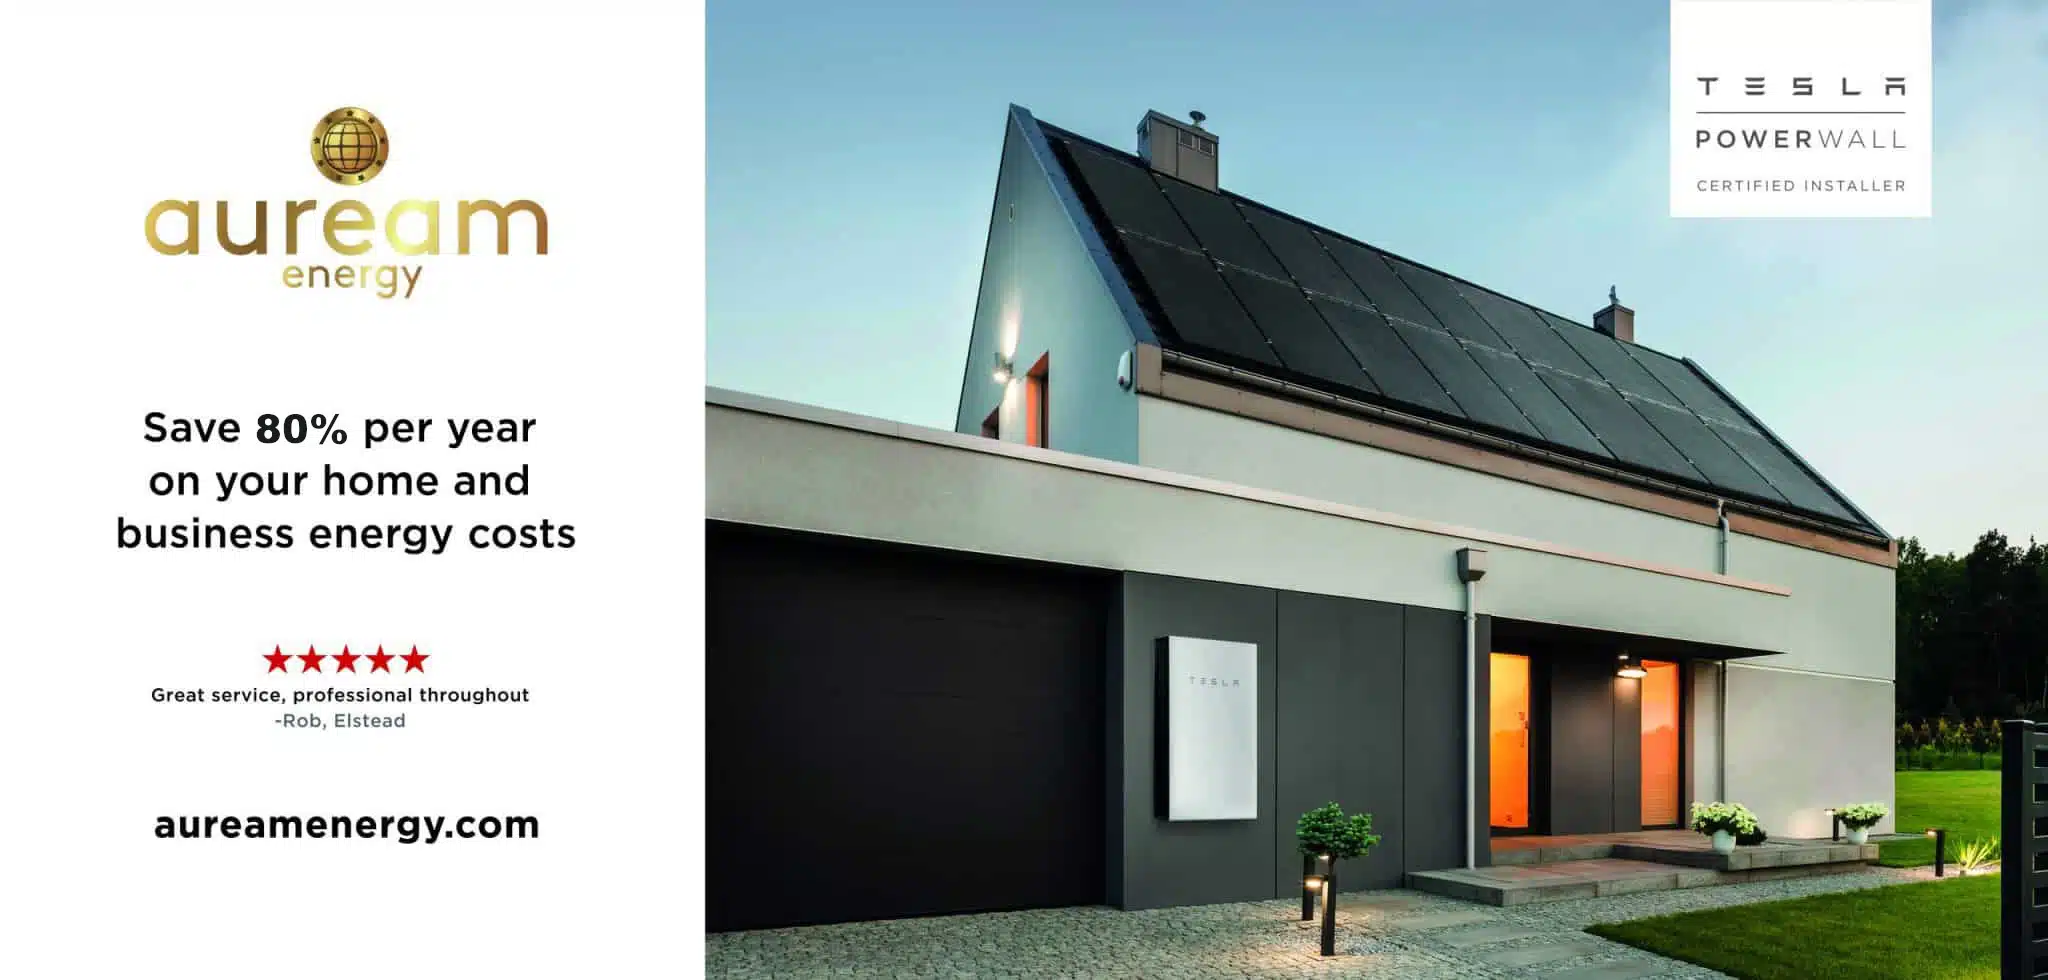 Property with a Tesla Powerwall 2